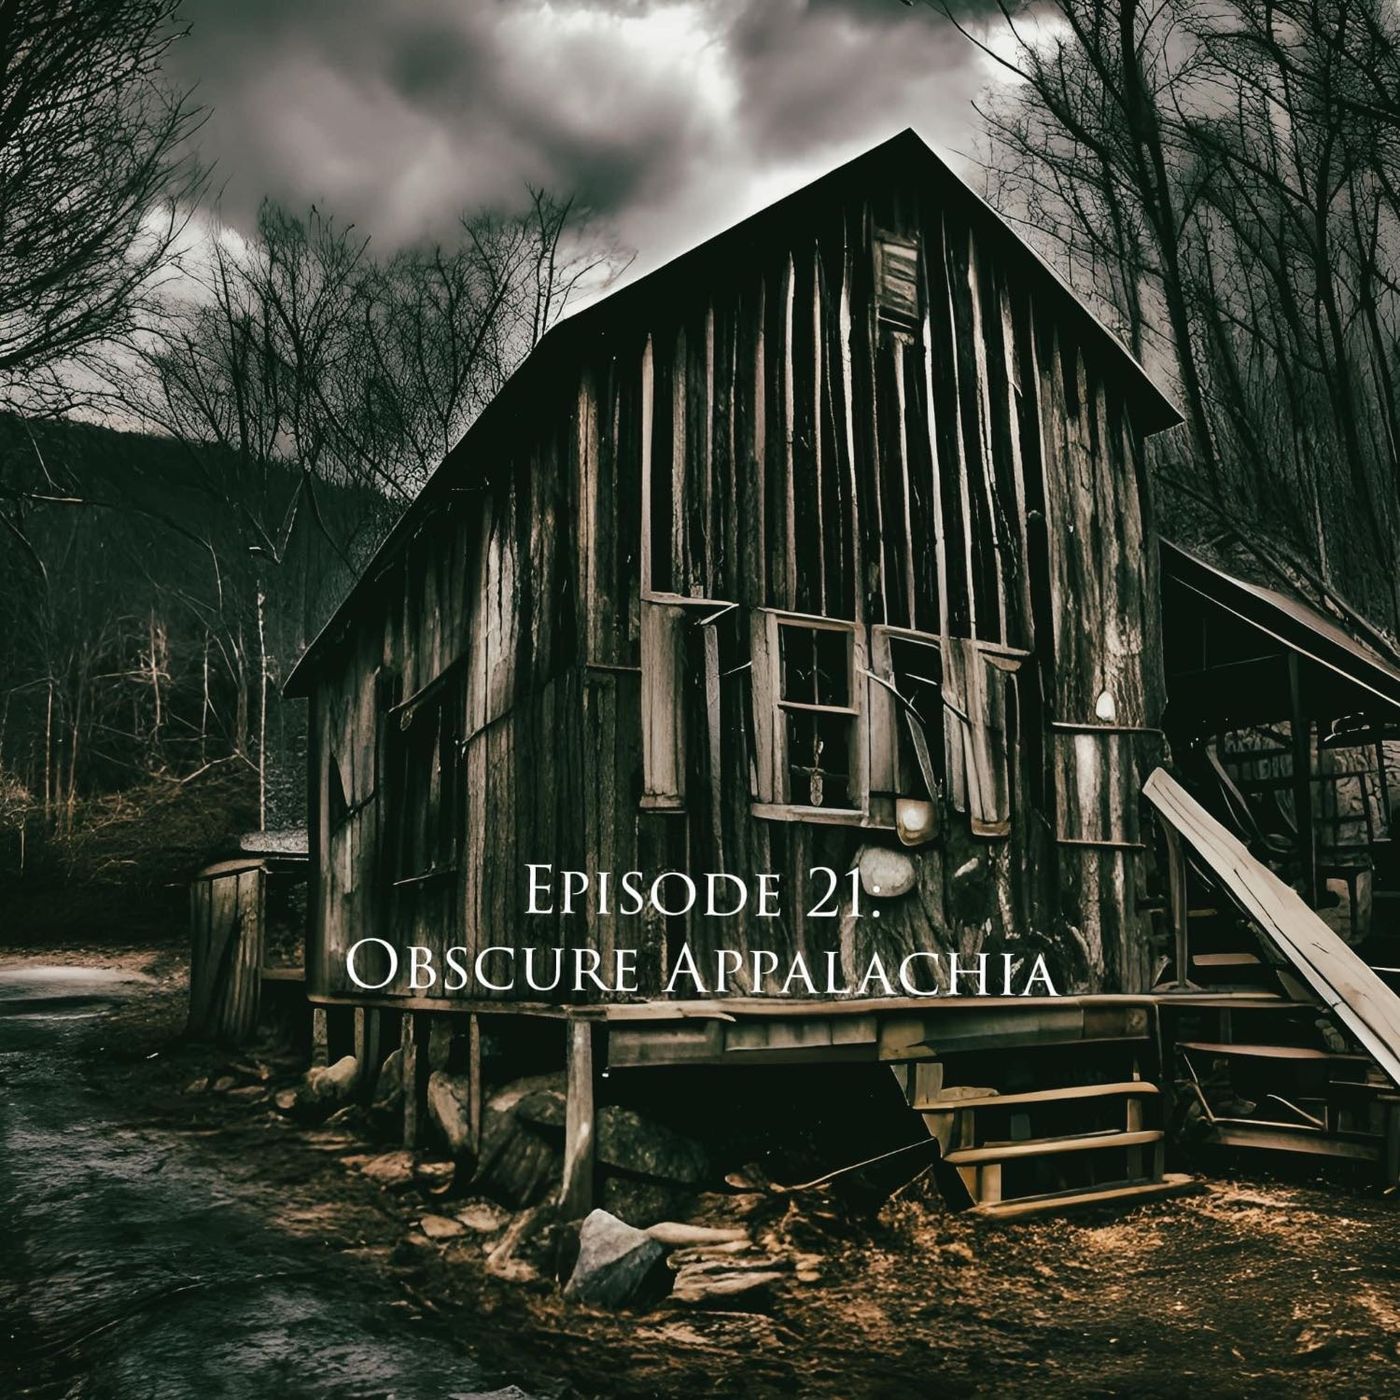 Ep. 21: Obscure Appalachia (ghosts, hauntings)